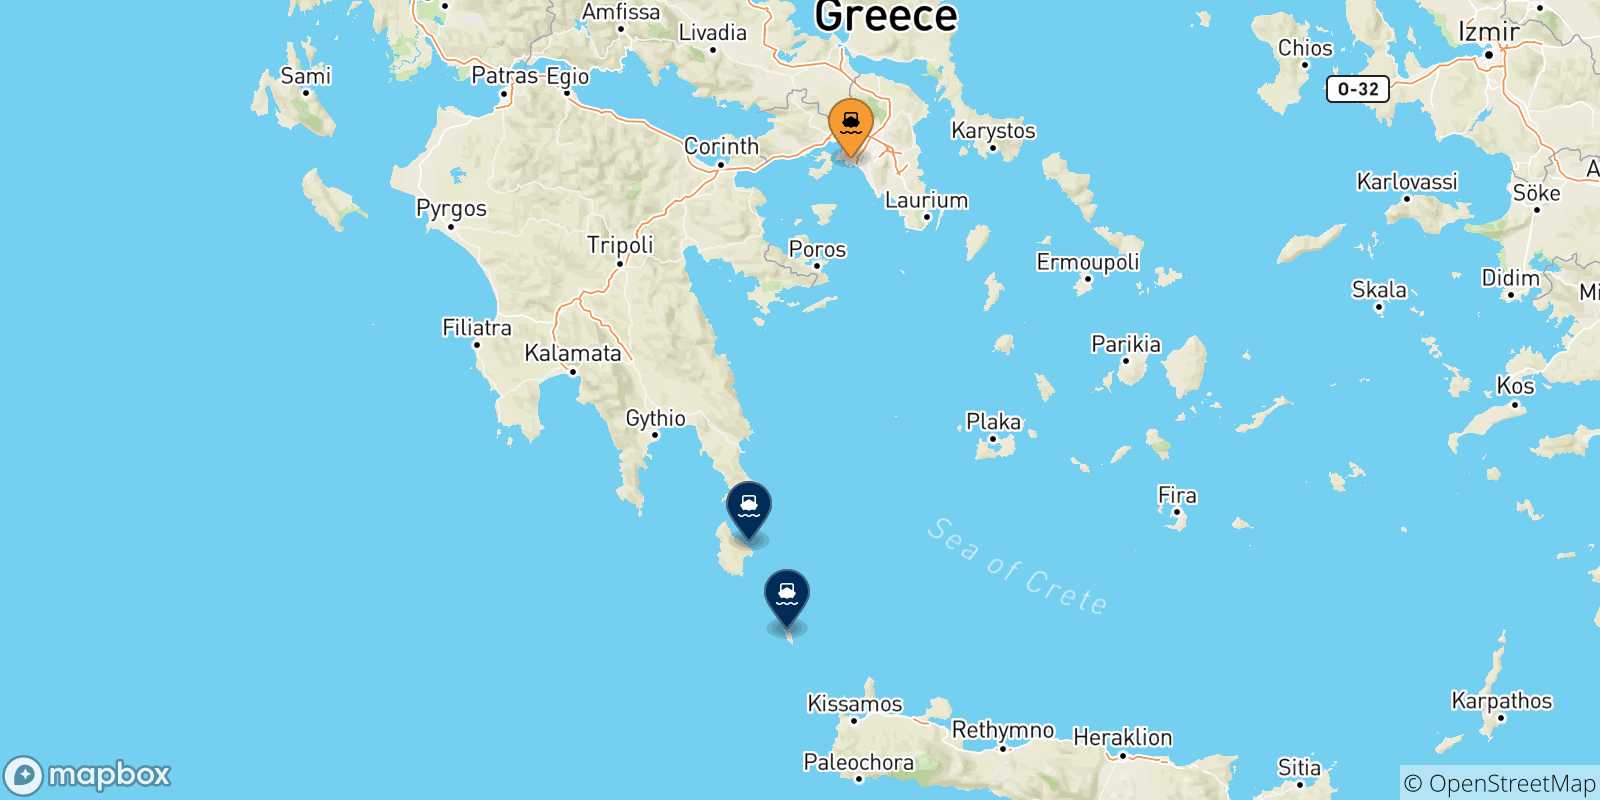 Map of the possible routes between Piraeus and Ionian Islands